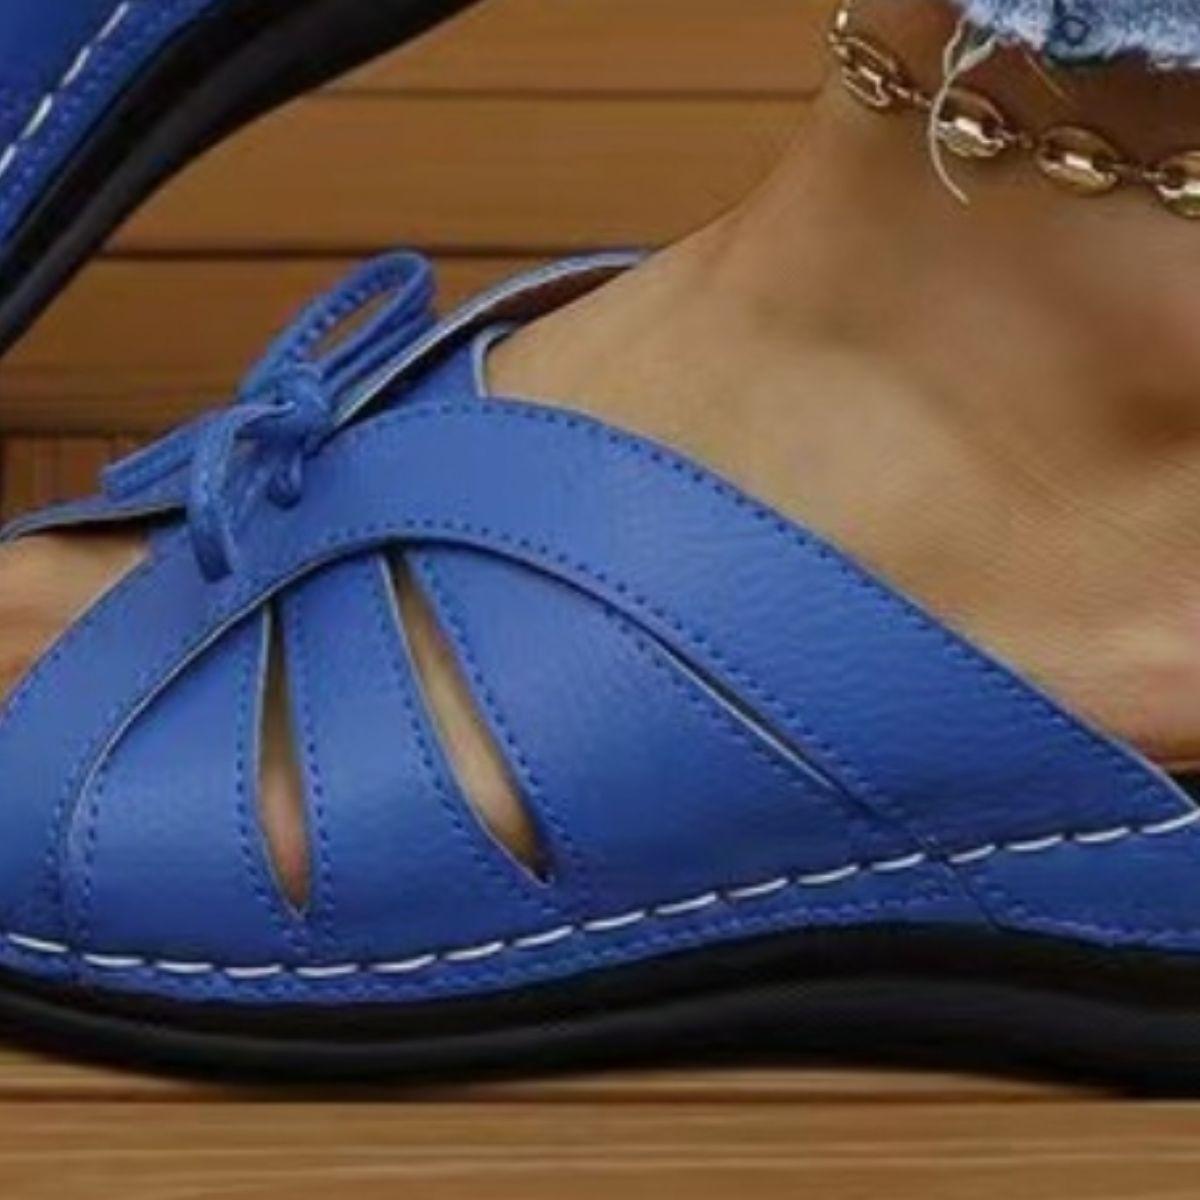 a close up of a person wearing blue sandals